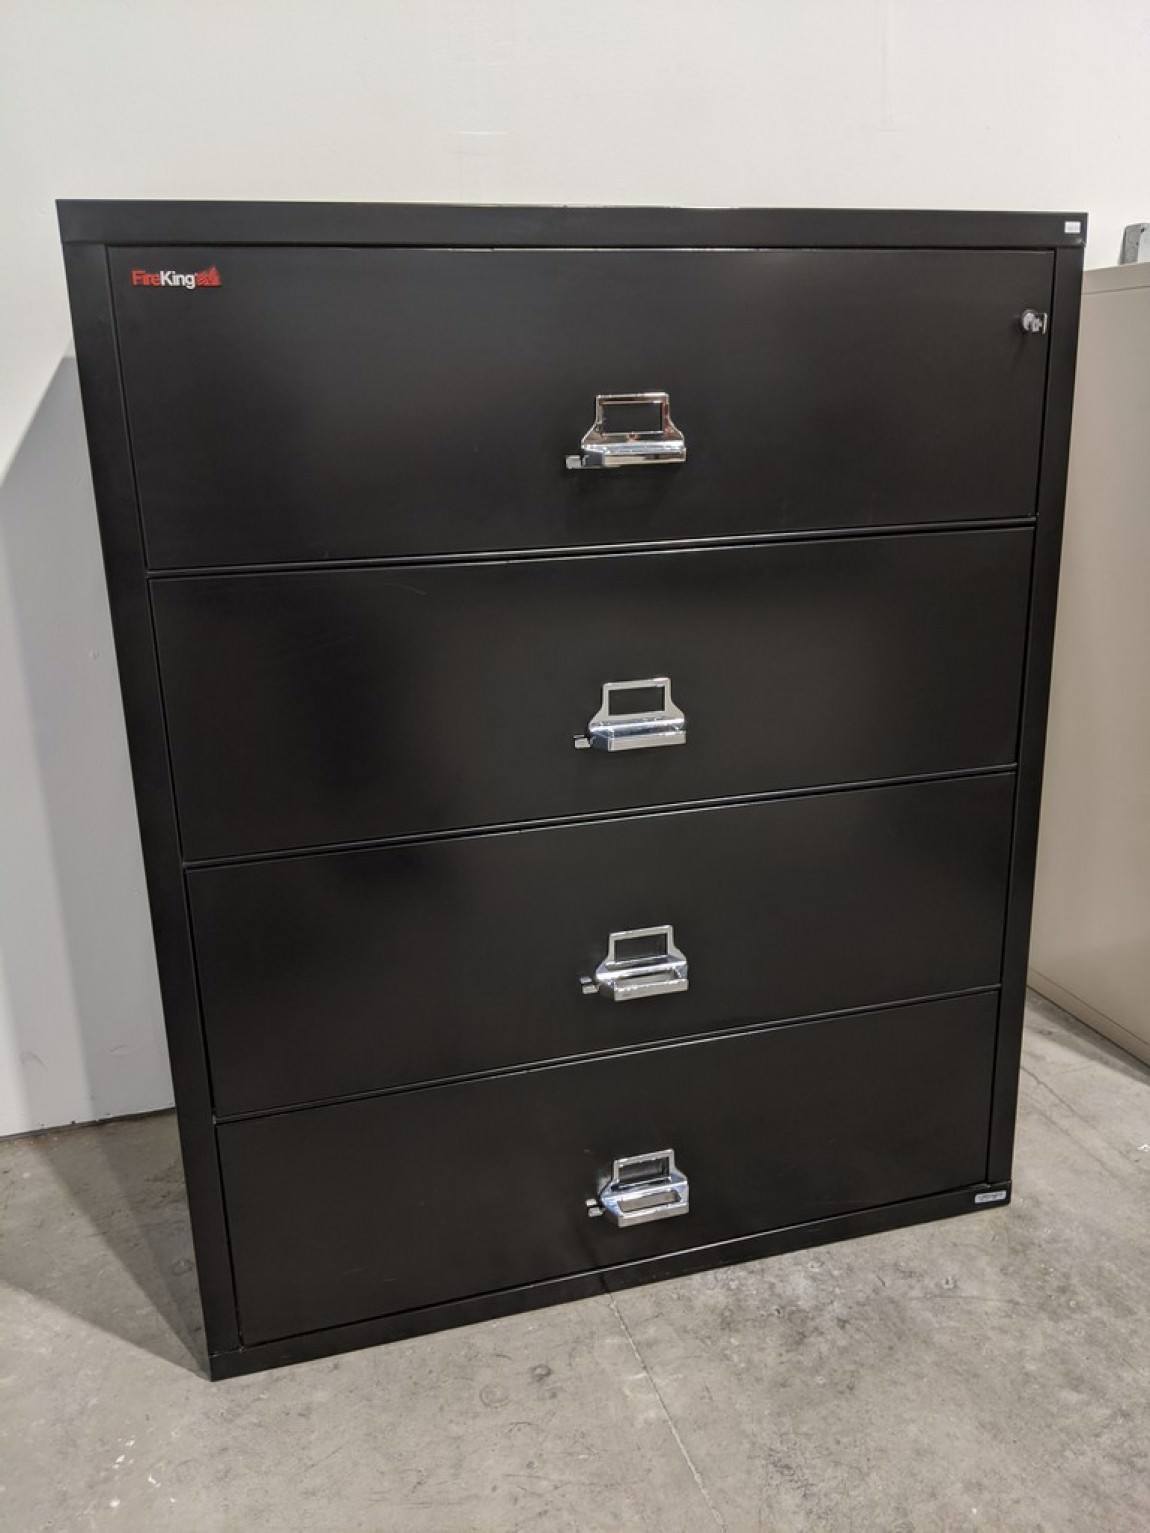 Fireking Fireproof 4 Drawer Lateral Filing Cabinets – 44.5 Inch Wide